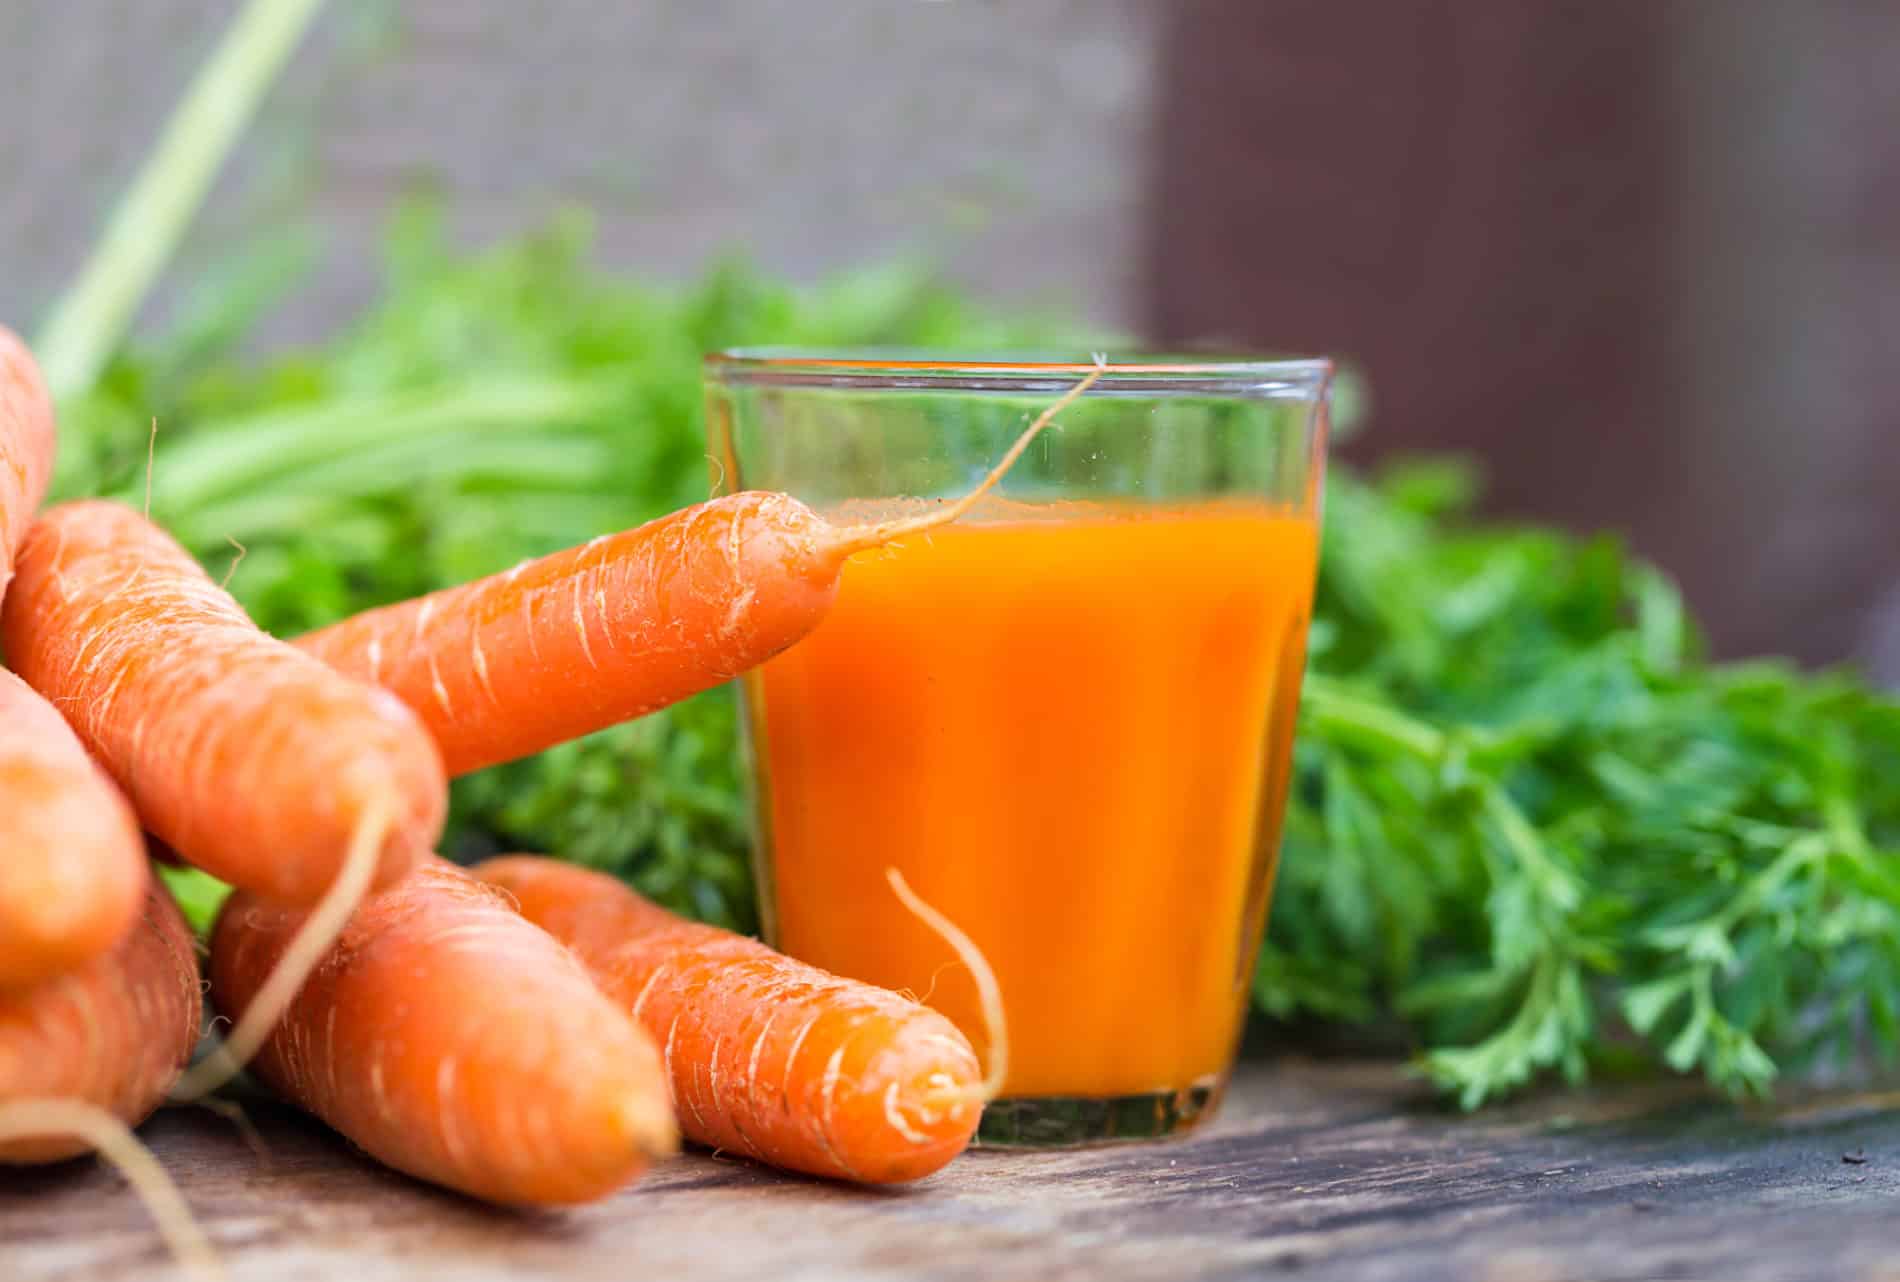 How Can I Make Carrot Juice Without A Juicer Typical Of Manggarai City